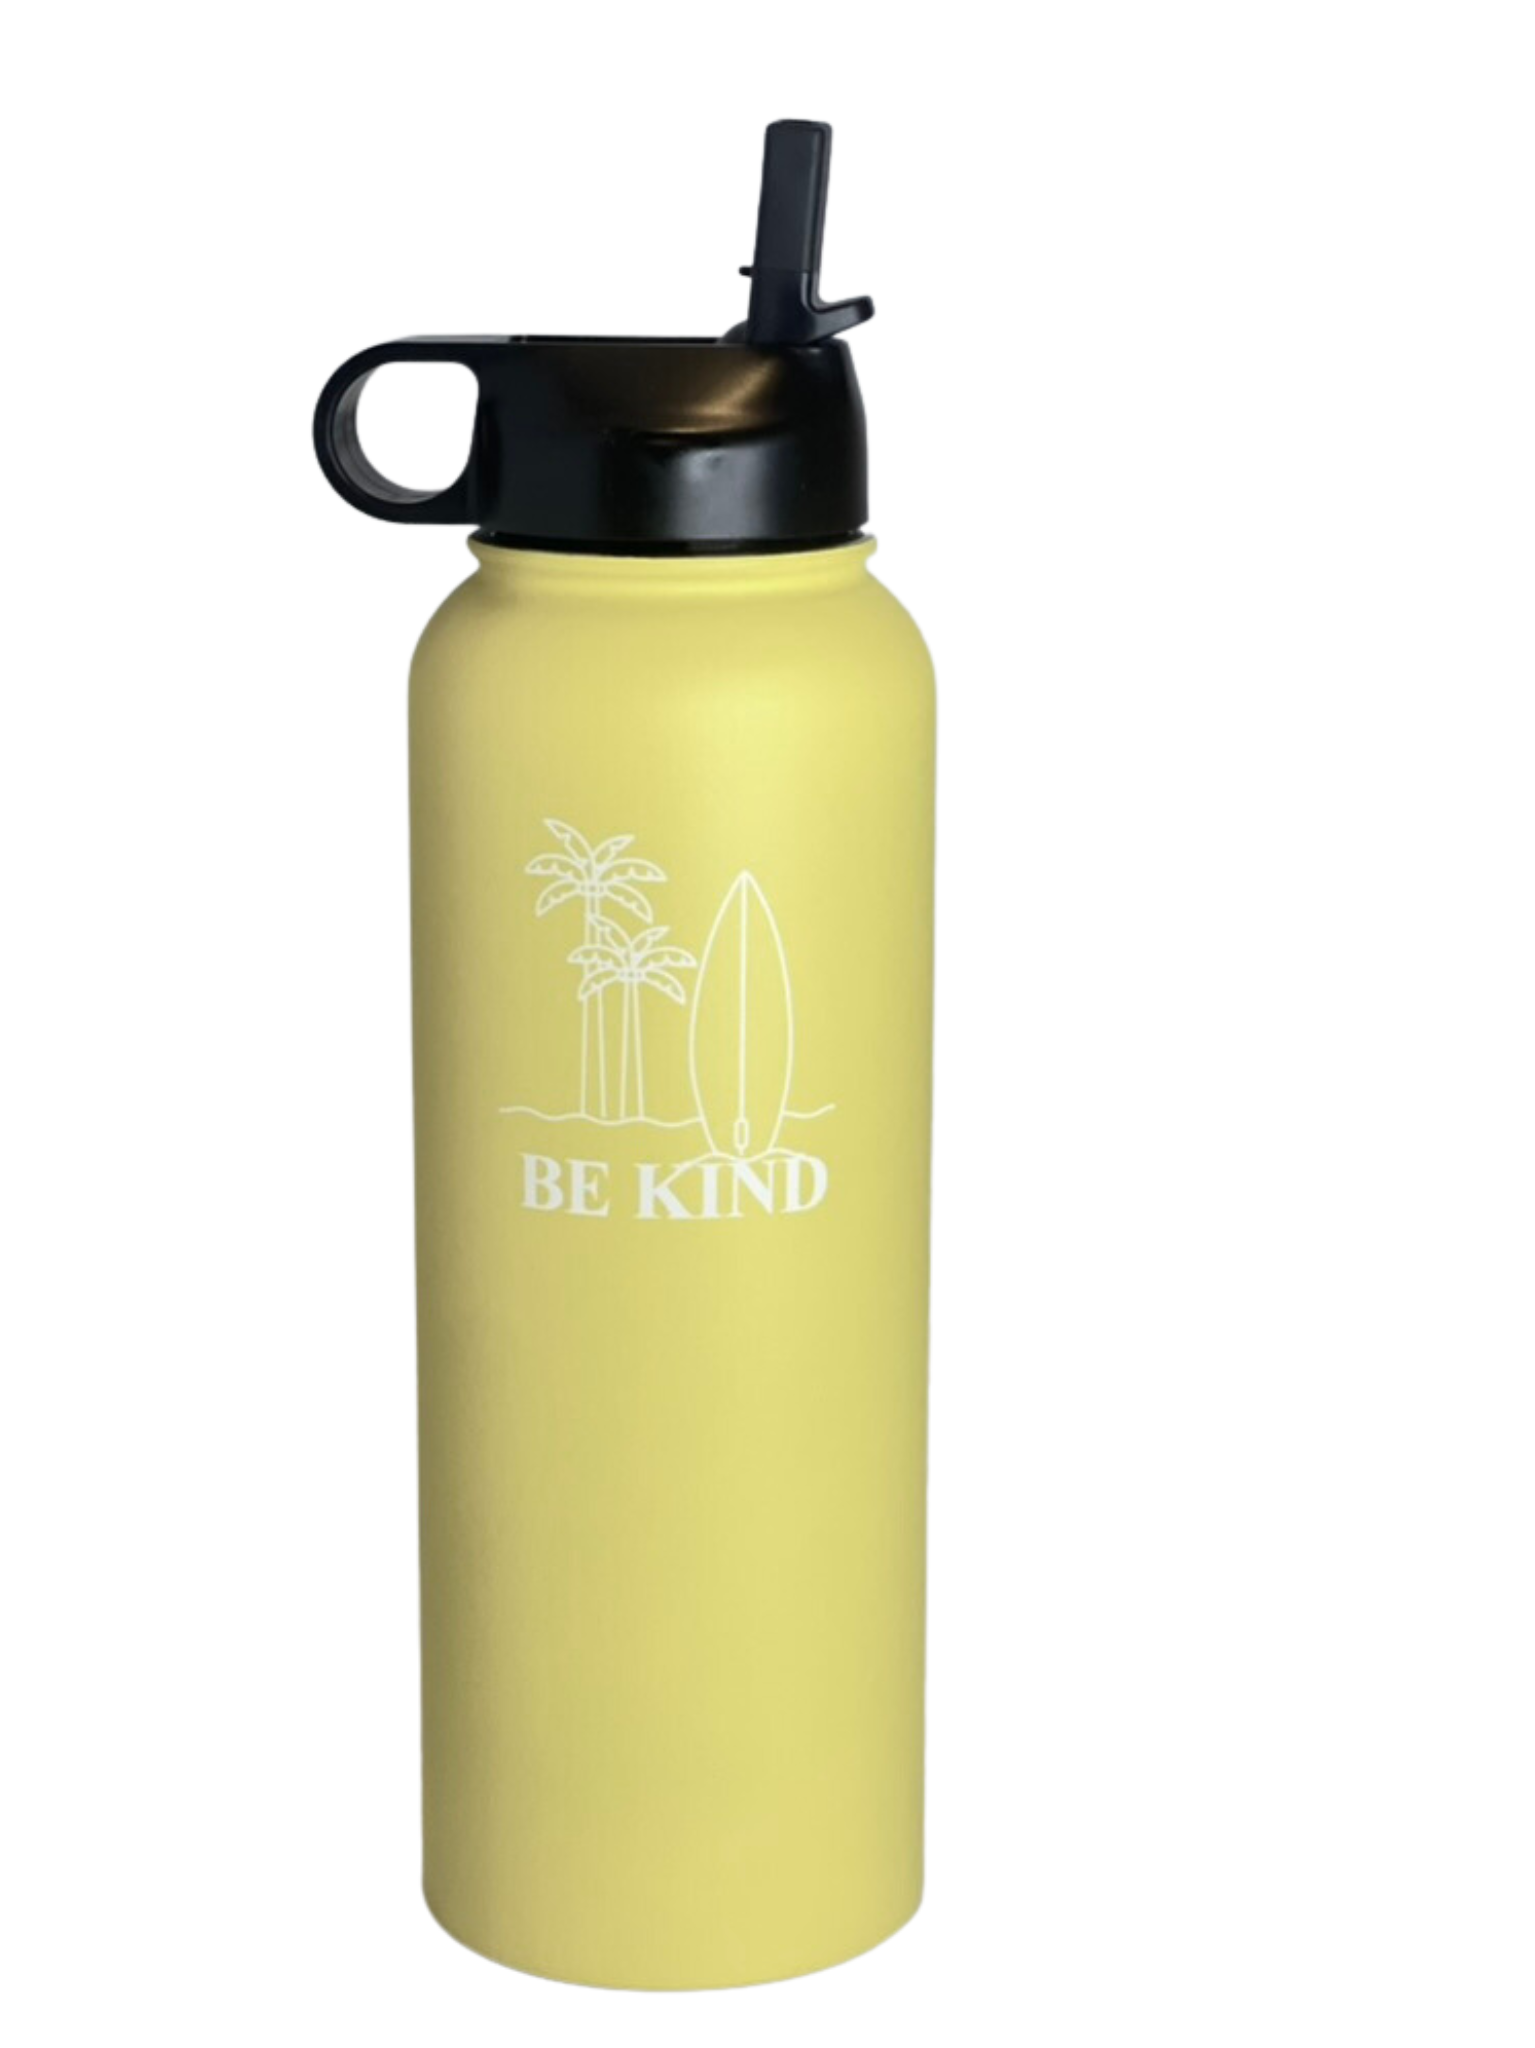 Durable double insulated travel, camping or beach drink bottle 1.2